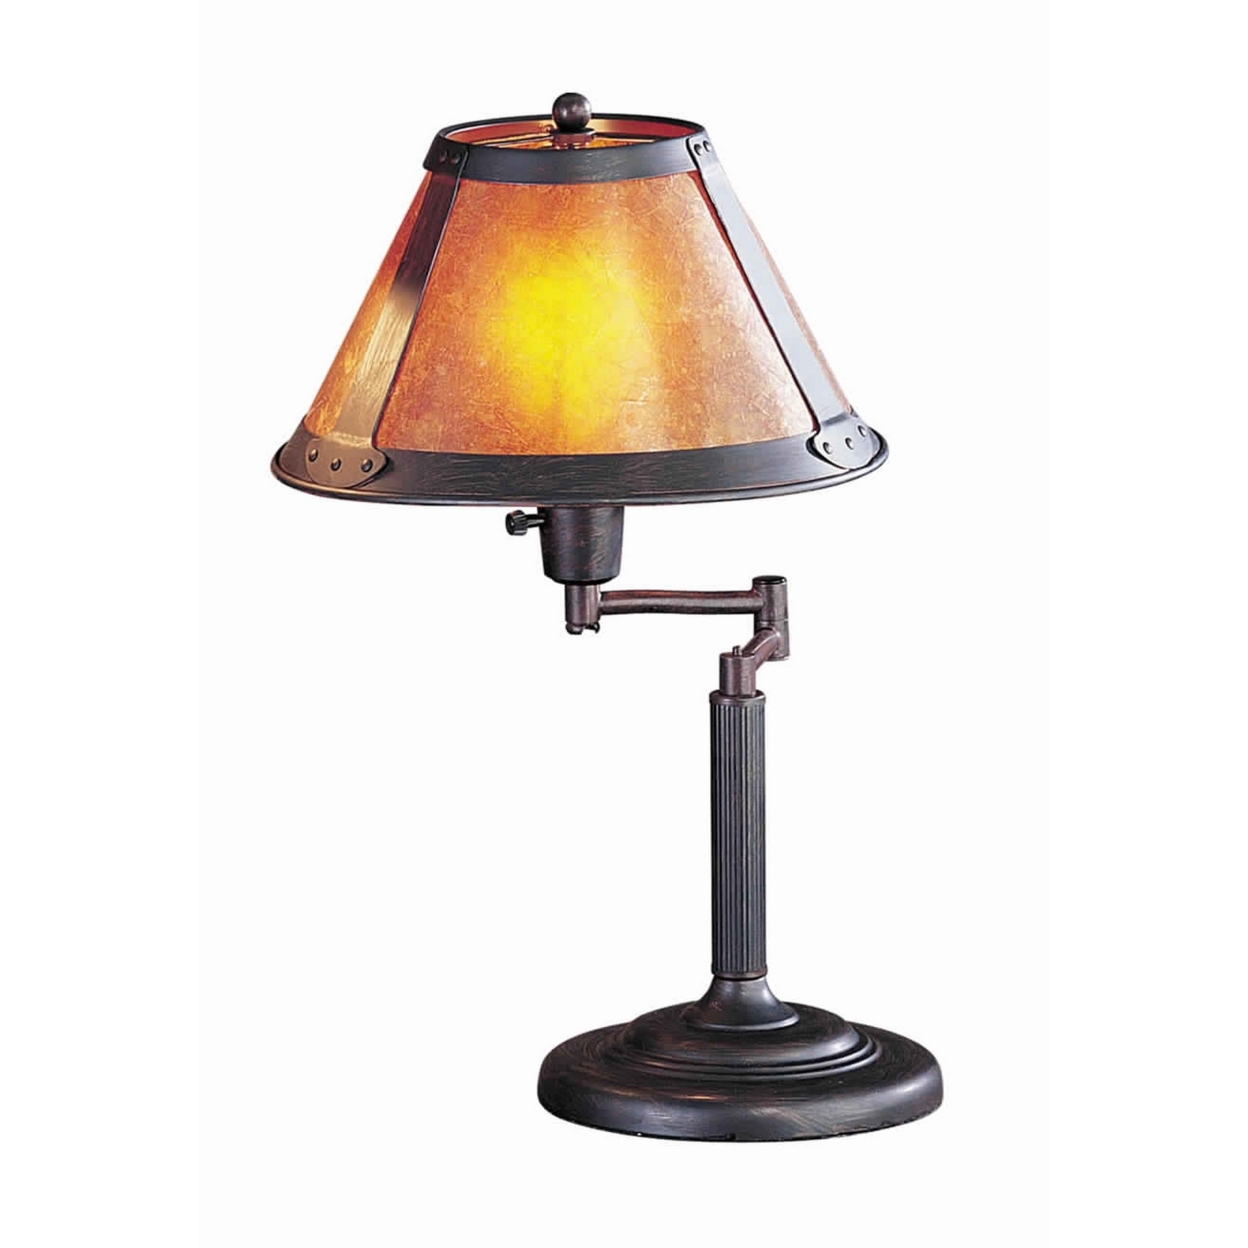 Metal Body Swing Arm Table Lamp With Conical Mica Shade, Bronze- Saltoro Sherpi